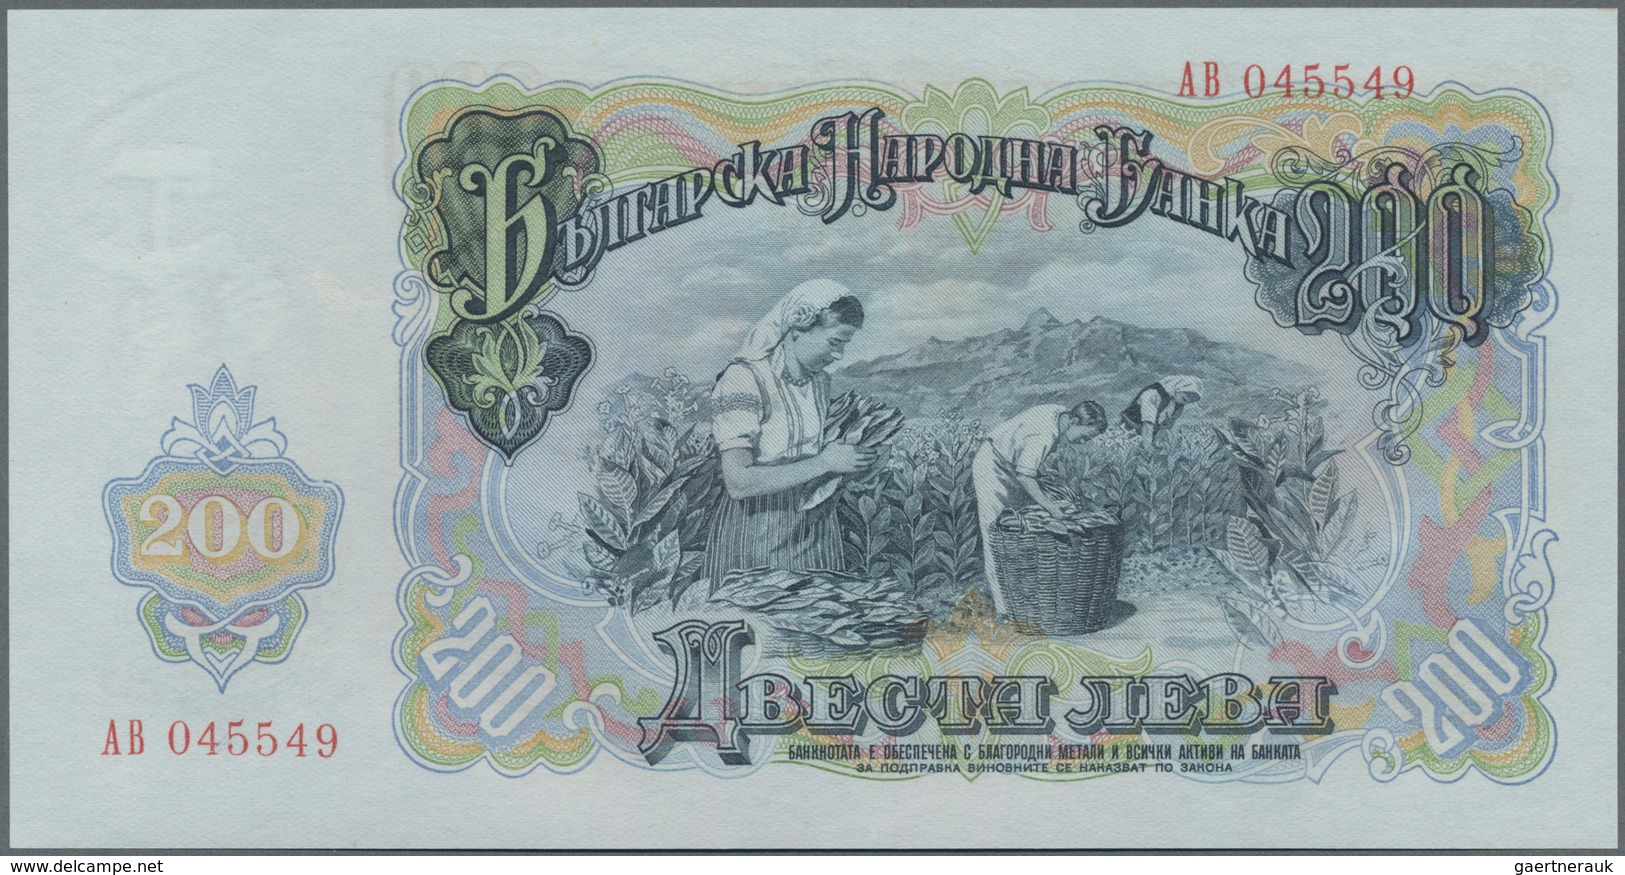 Bulgaria / Bulgarien: Very nice set with 20 Banknotes 1 - 500 Leva 1951-1990, P.80a-98, all in aUNC/